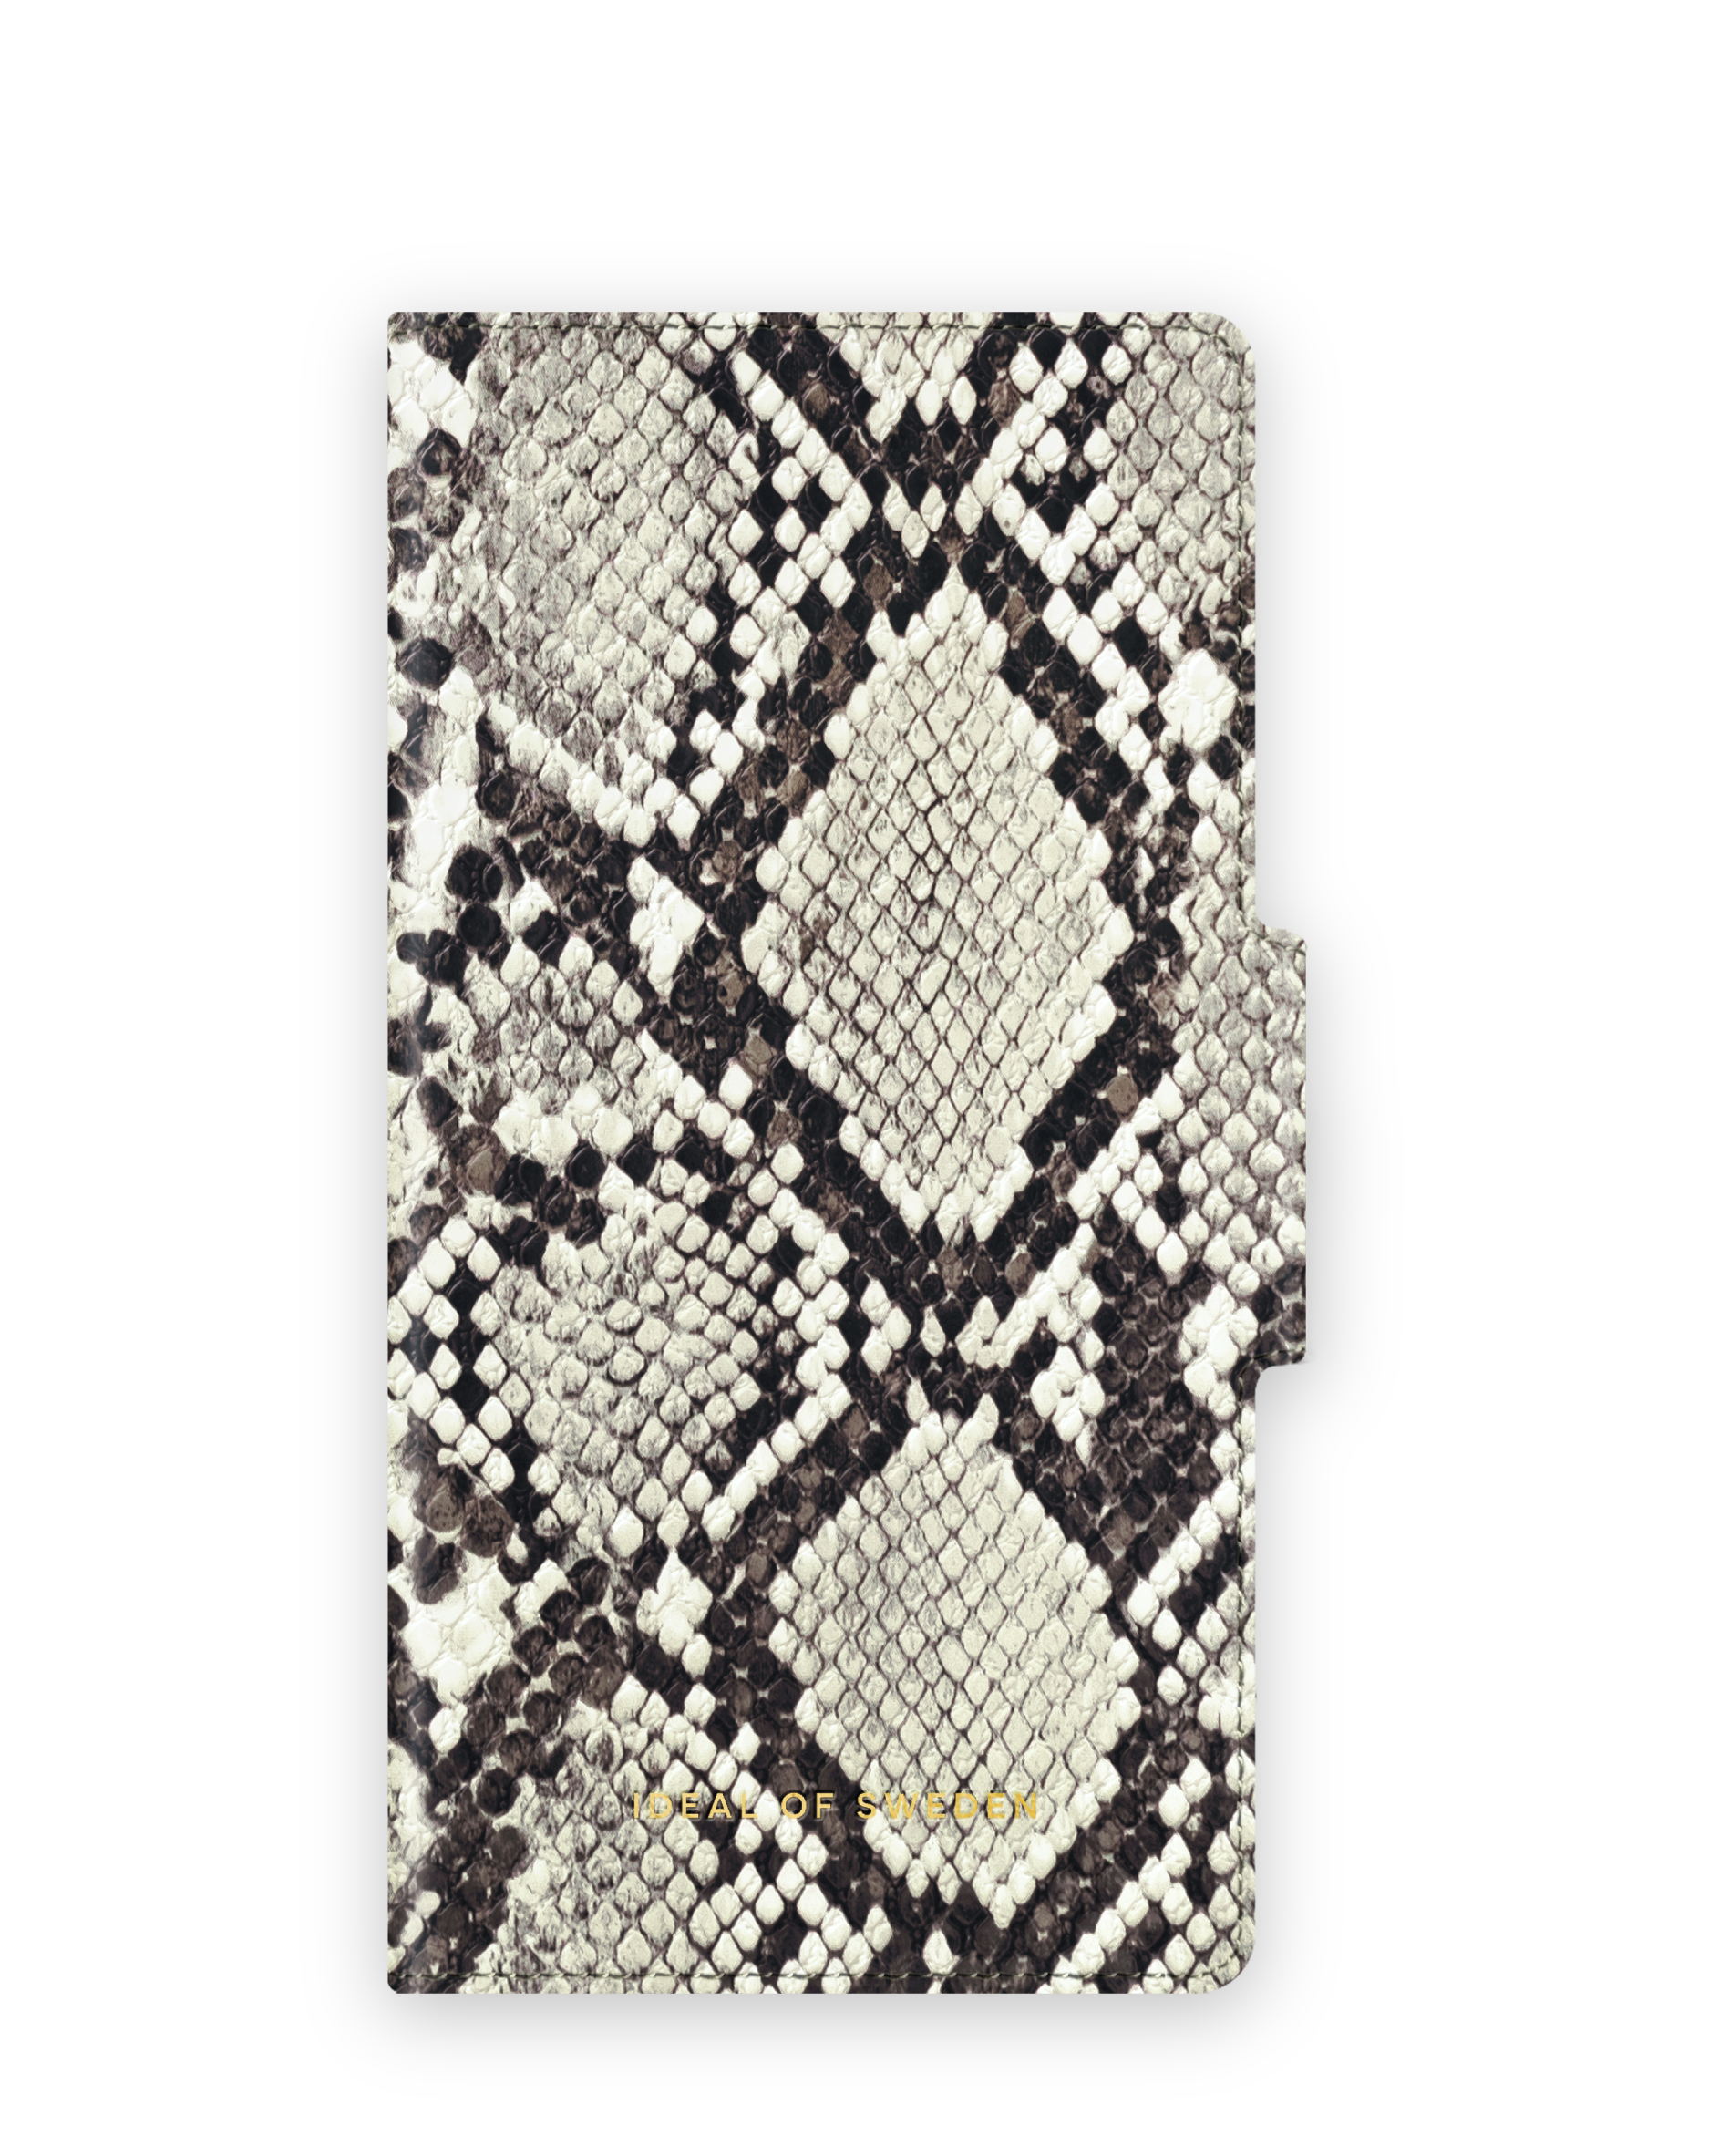 12 SWEDEN iPhone Snake OF Pro, iPhone Eternal 12, Apple Bookcover, Apple Apple, IDAW-I2061-231, IDEAL